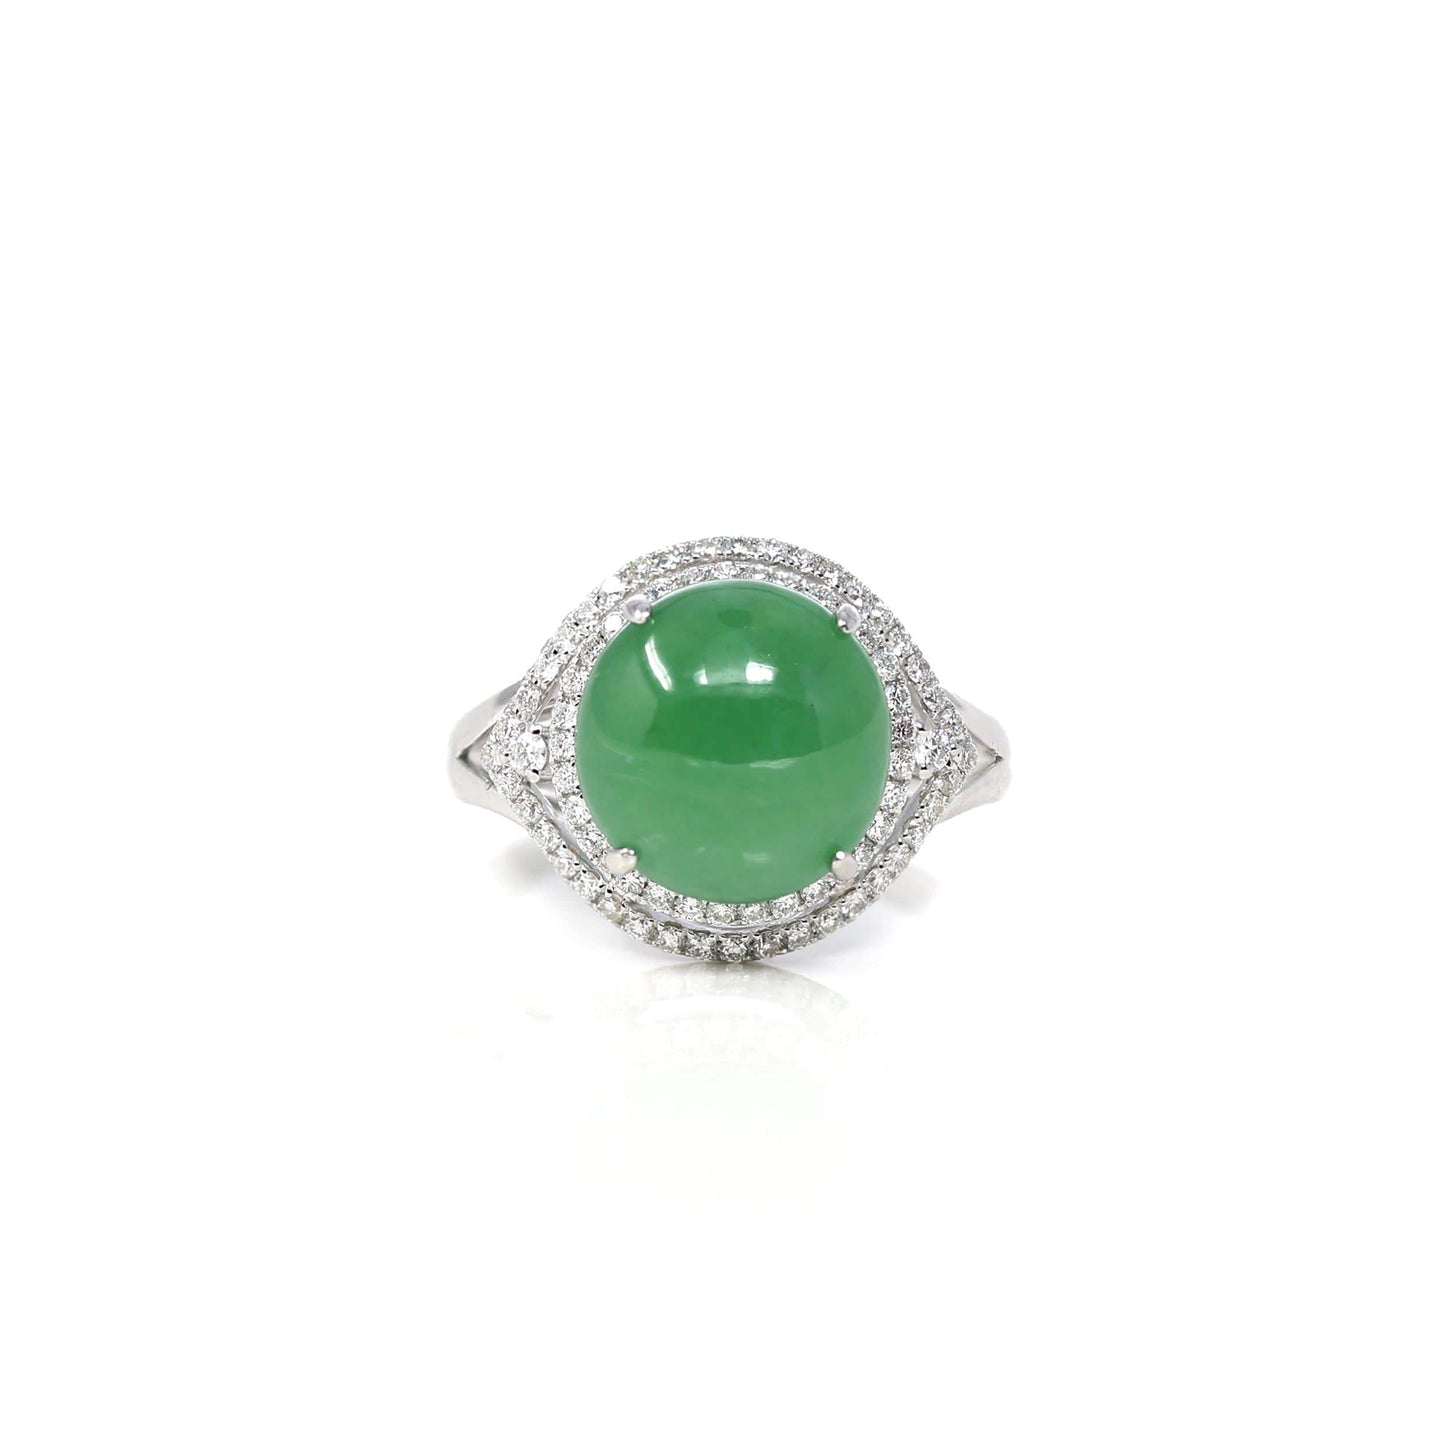 RealJade¨ Co. Jadeite Engagement Ring 18k White Gold Natural Imperial Green Oval Jadeite Jade Engagement Ring With Diamonds